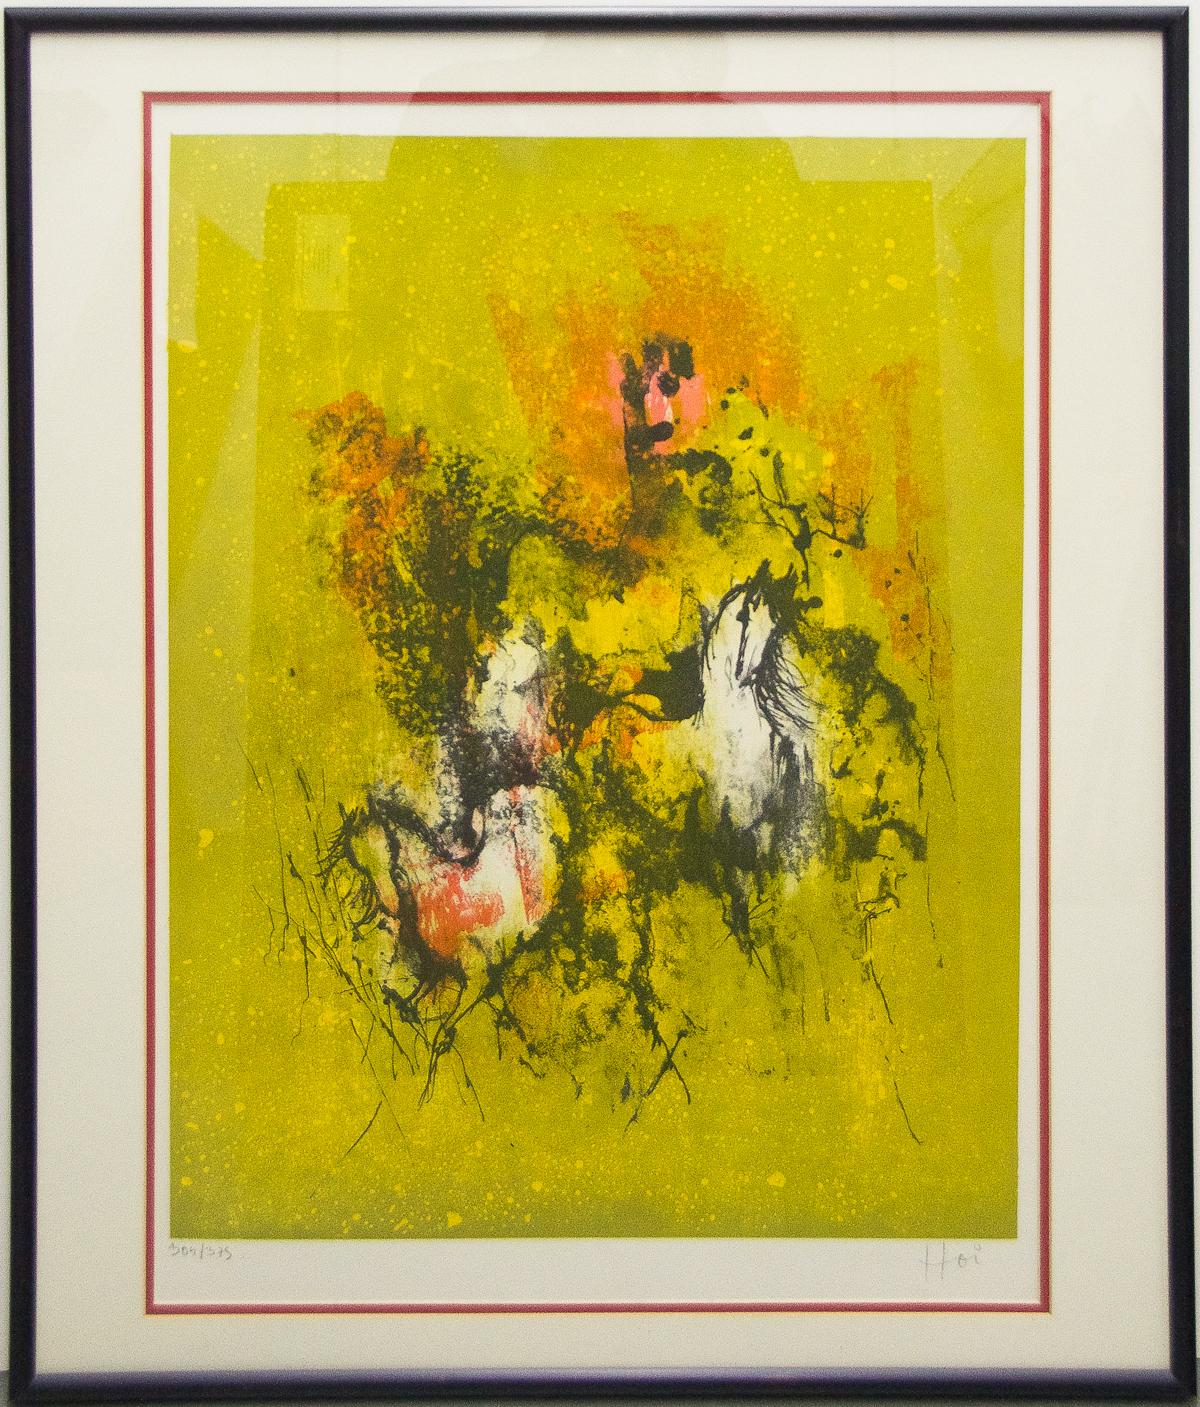 HOI LEBADANG - Framed Signed Limited Edition Lithograph of Horse. Hand Signed.